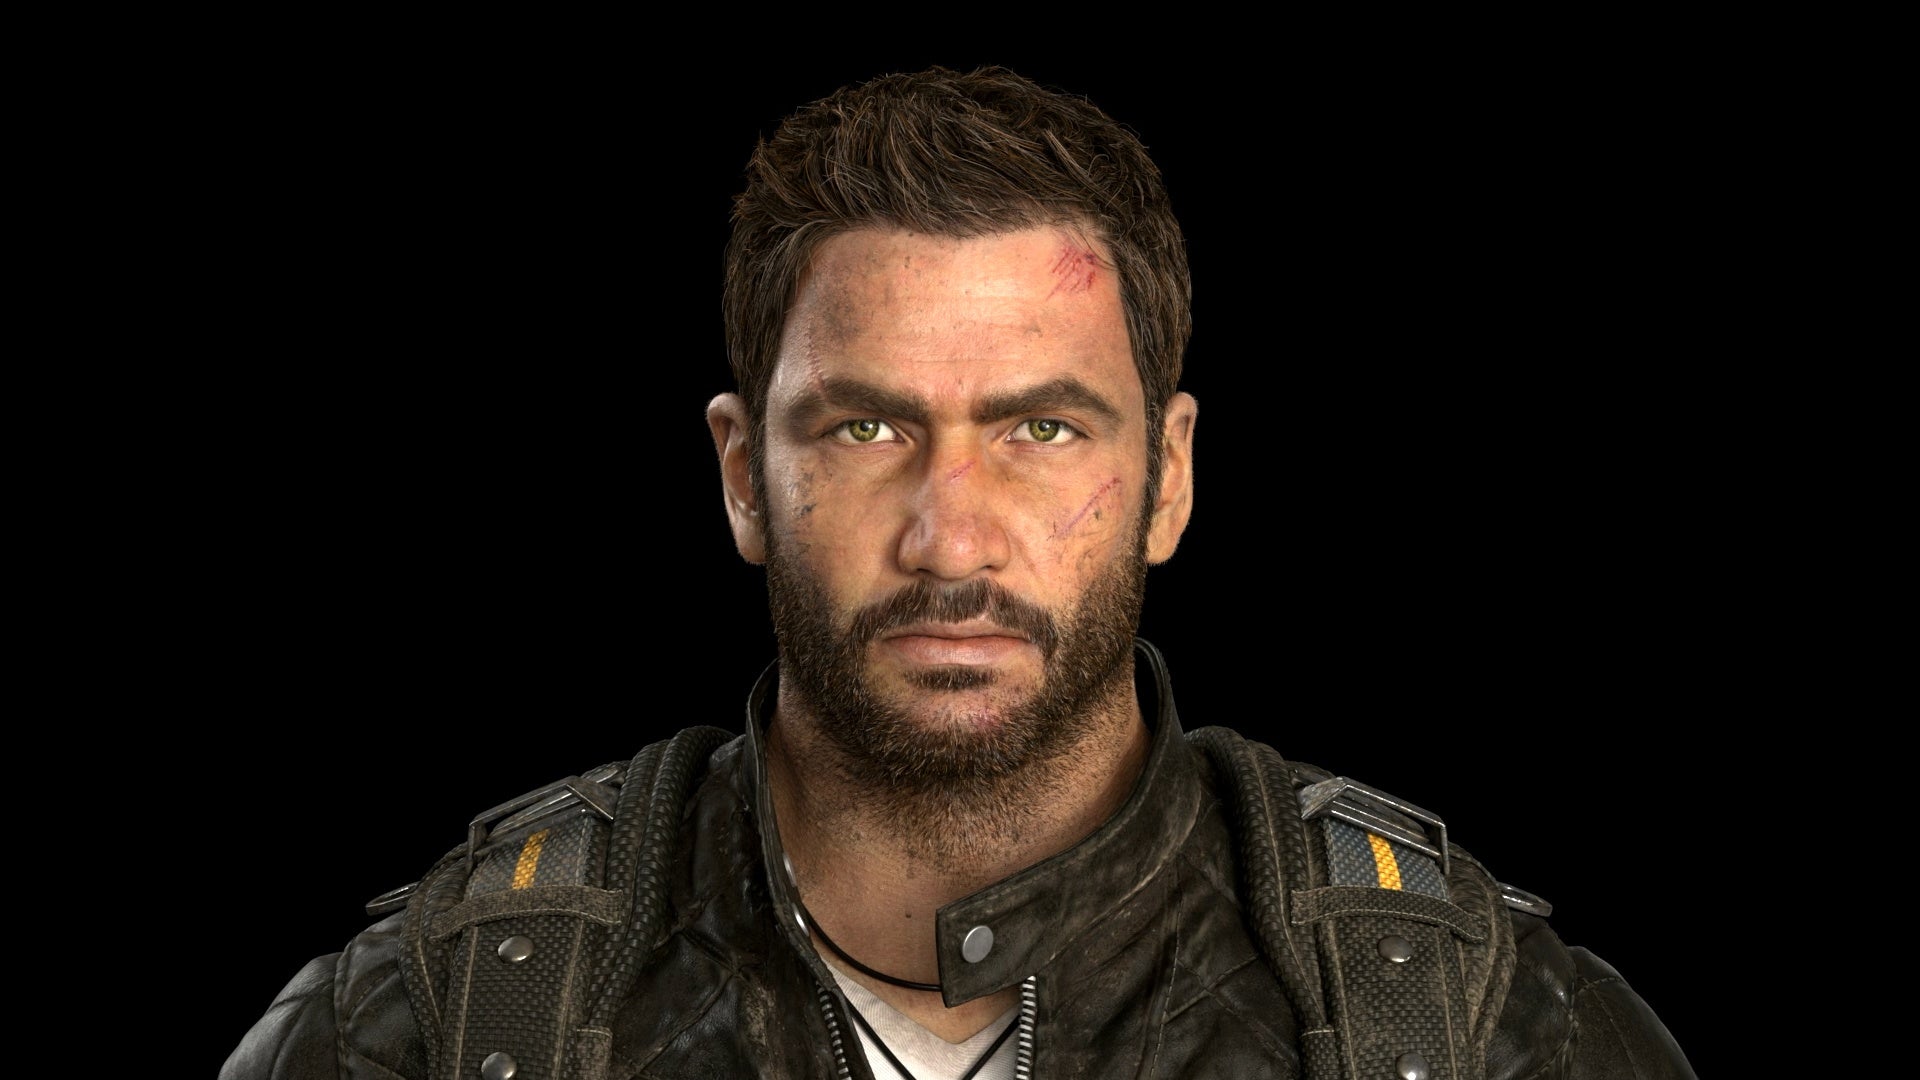 Image for This new Just Cause 4 trailer provides more information on the game's story